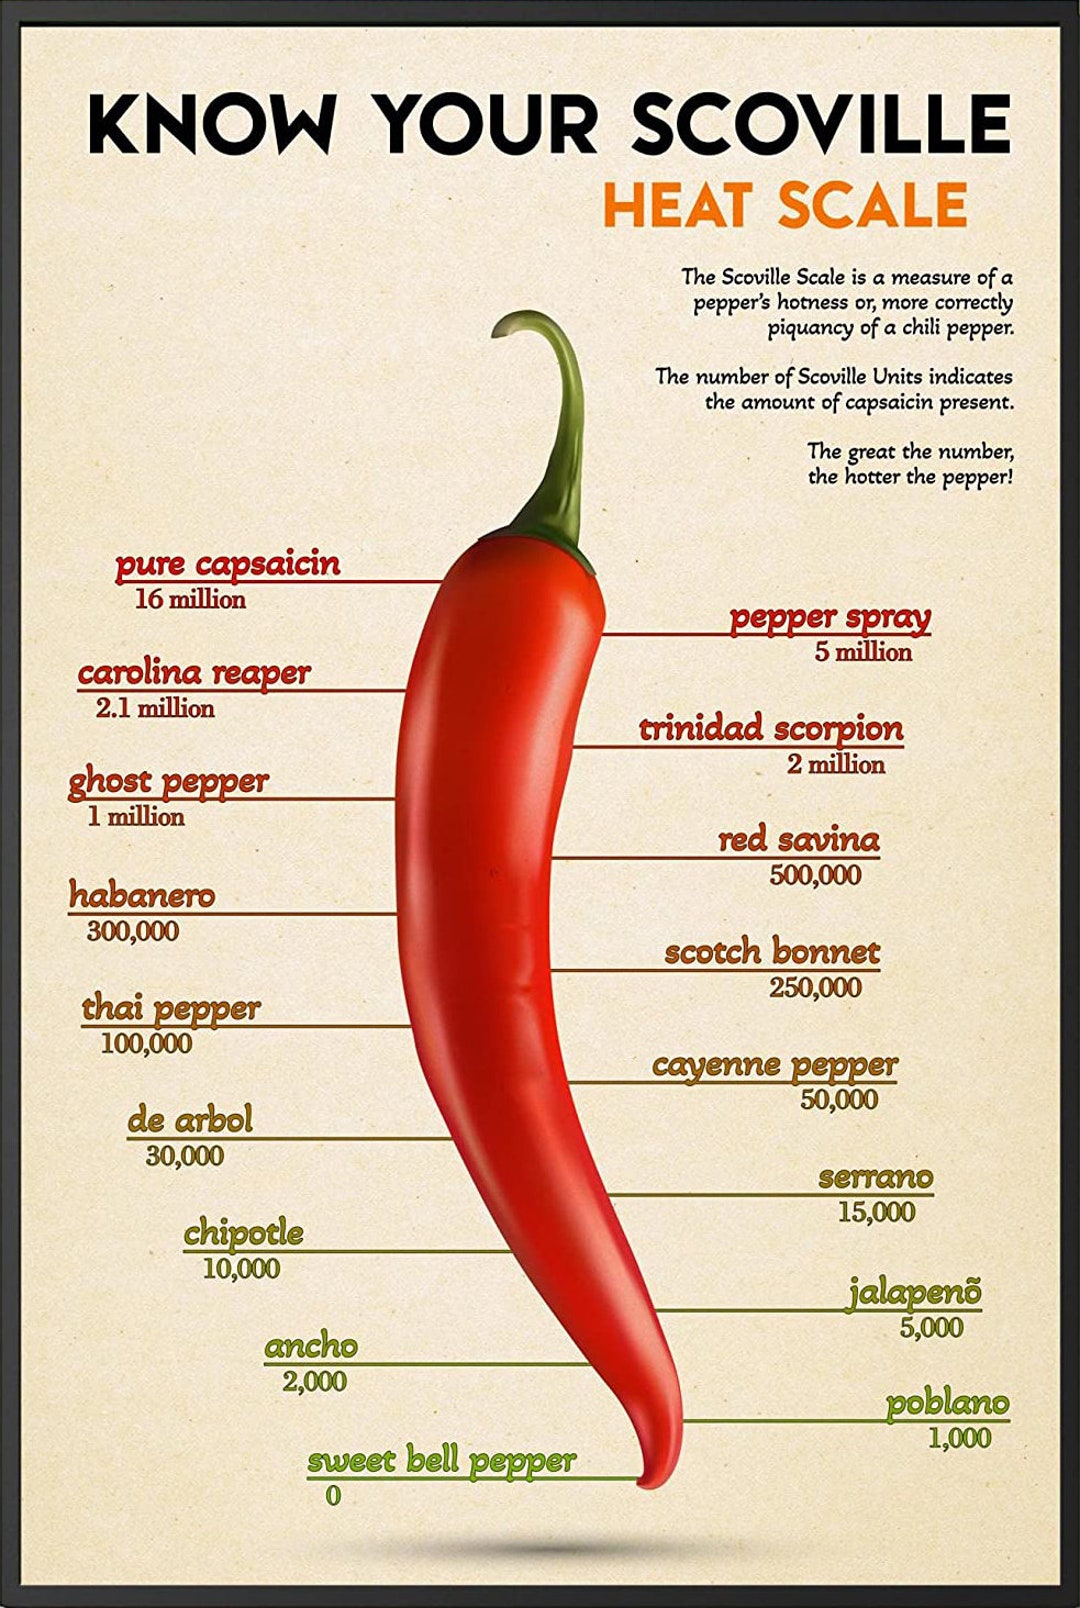 Know Your Scoville Heat Scale Wall Art, Spiciness and Pungency in Hot ...